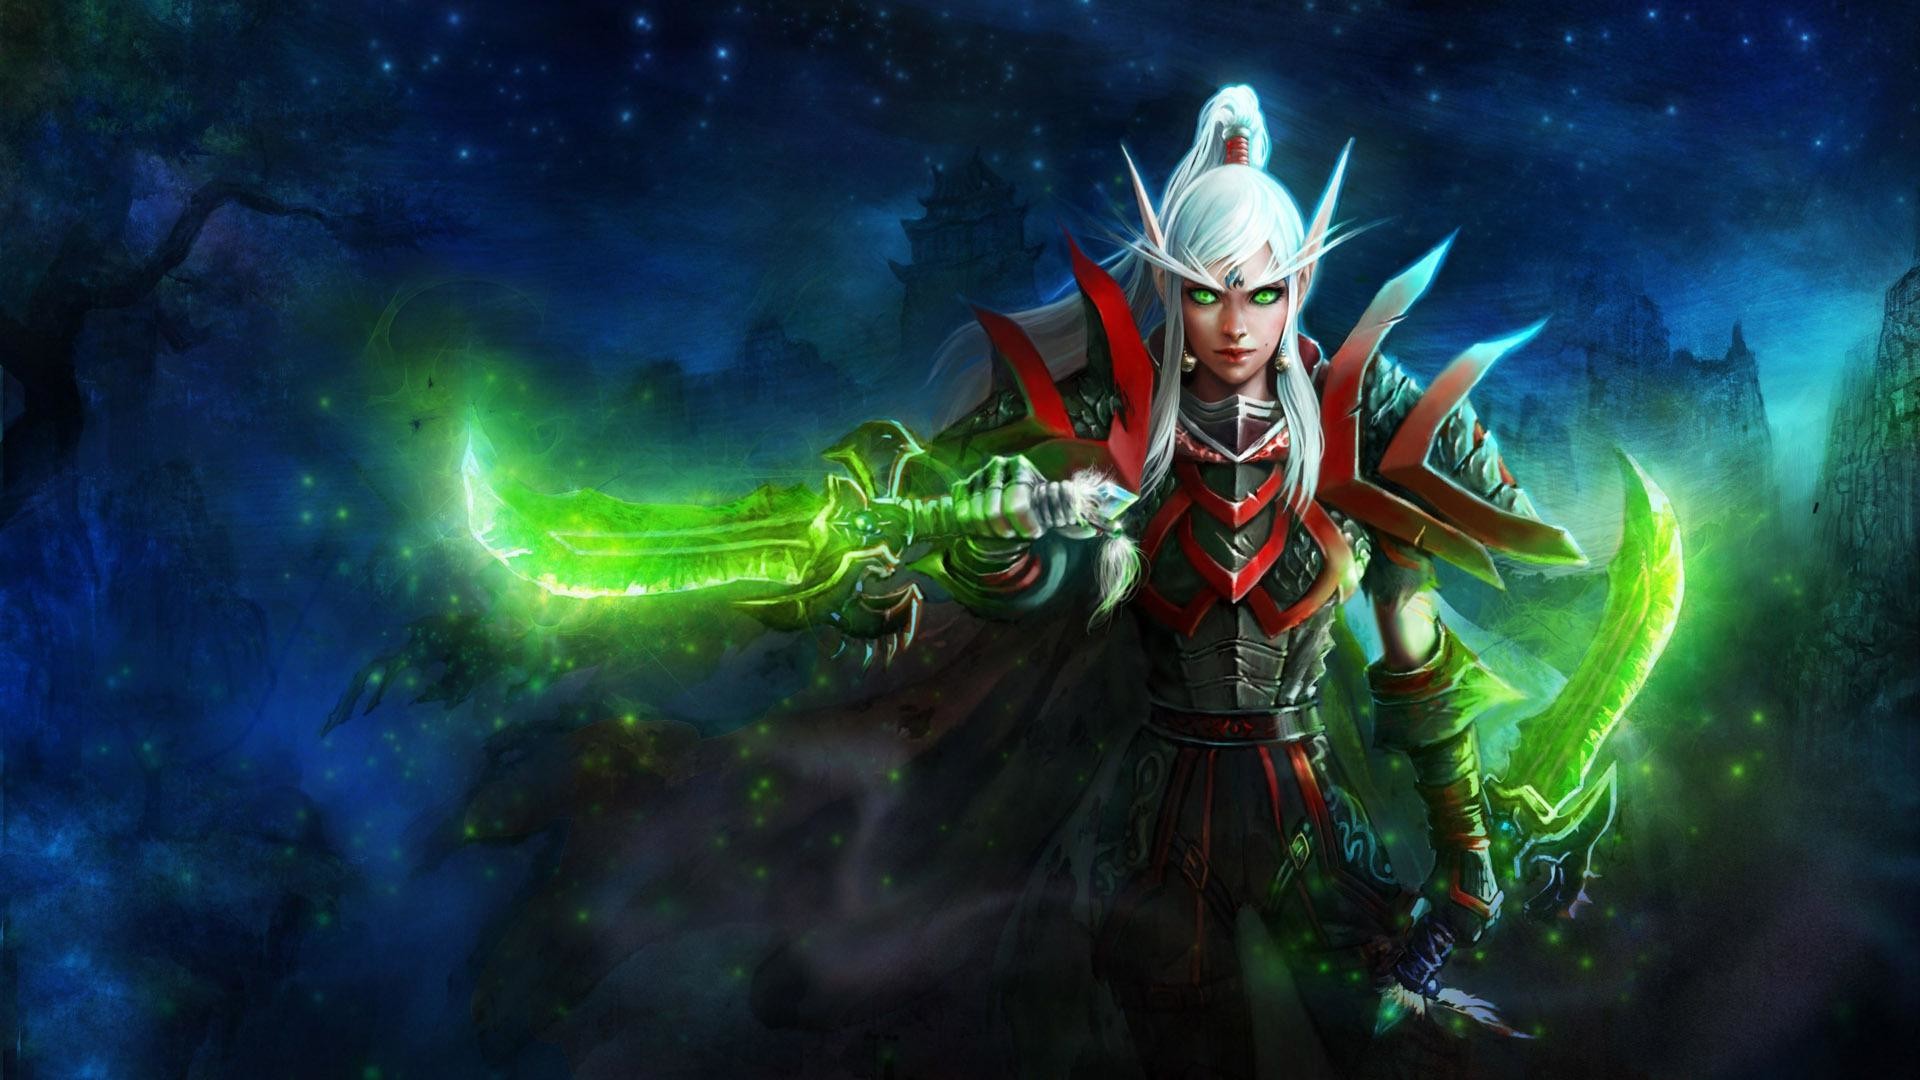 1920x1080 World Of Warcraft Rogue Wallpapers Group (62+)